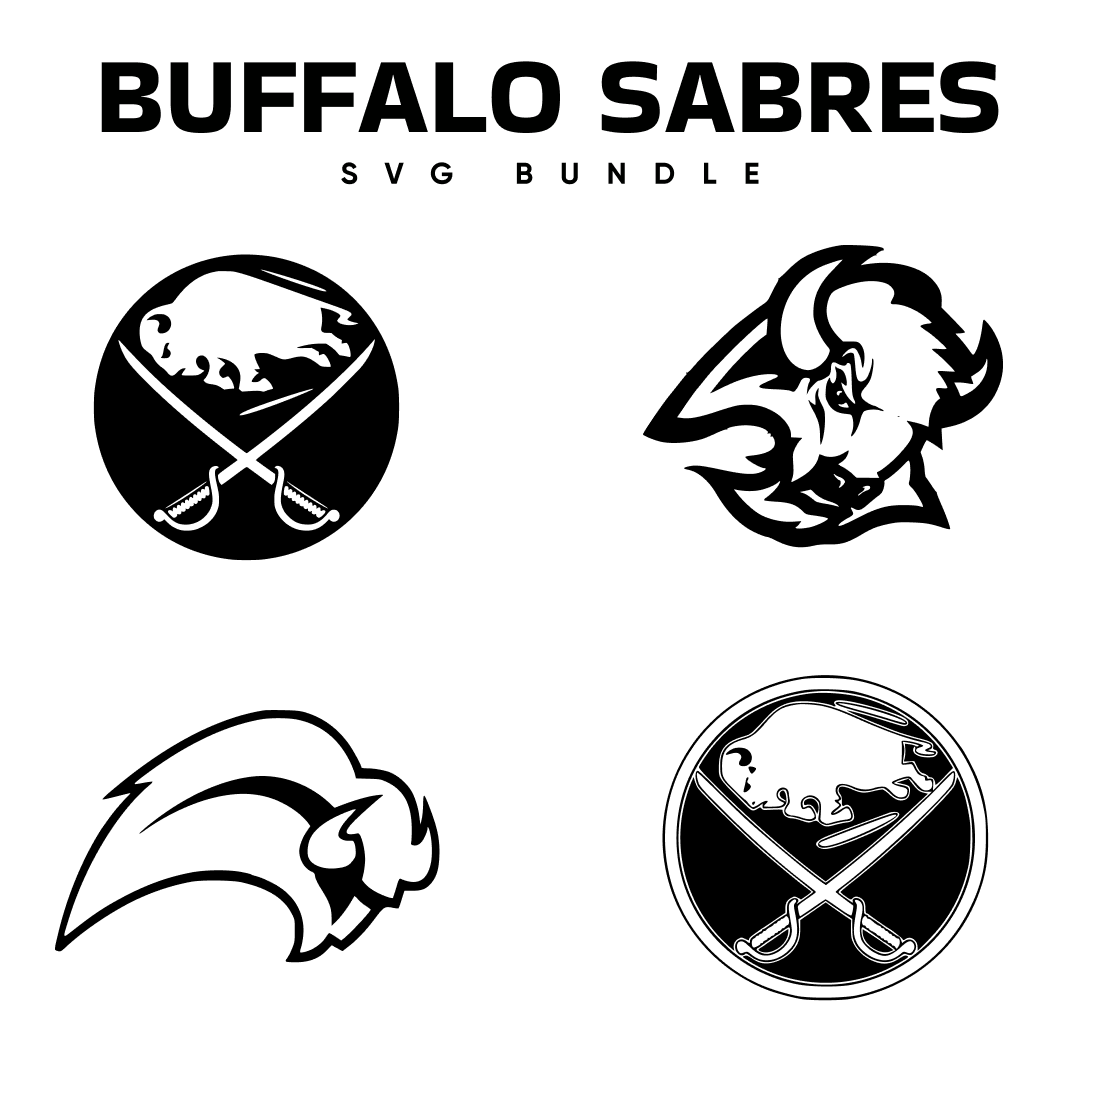 Bunch of logos that are on a white background.